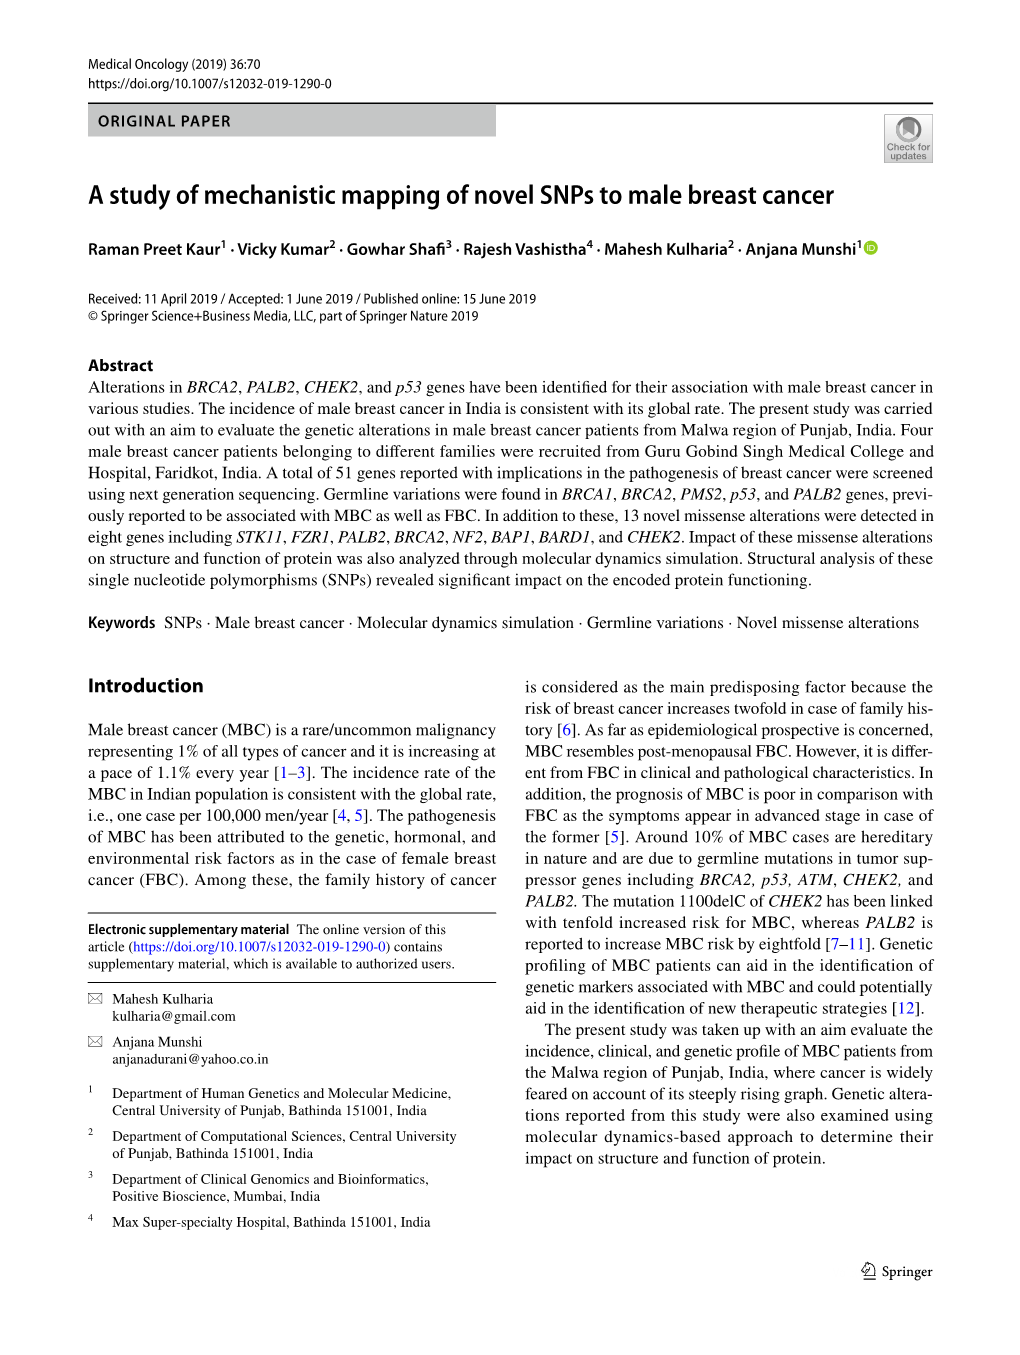 A Study of Mechanistic Mapping of Novel Snps to Male Breast Cancer